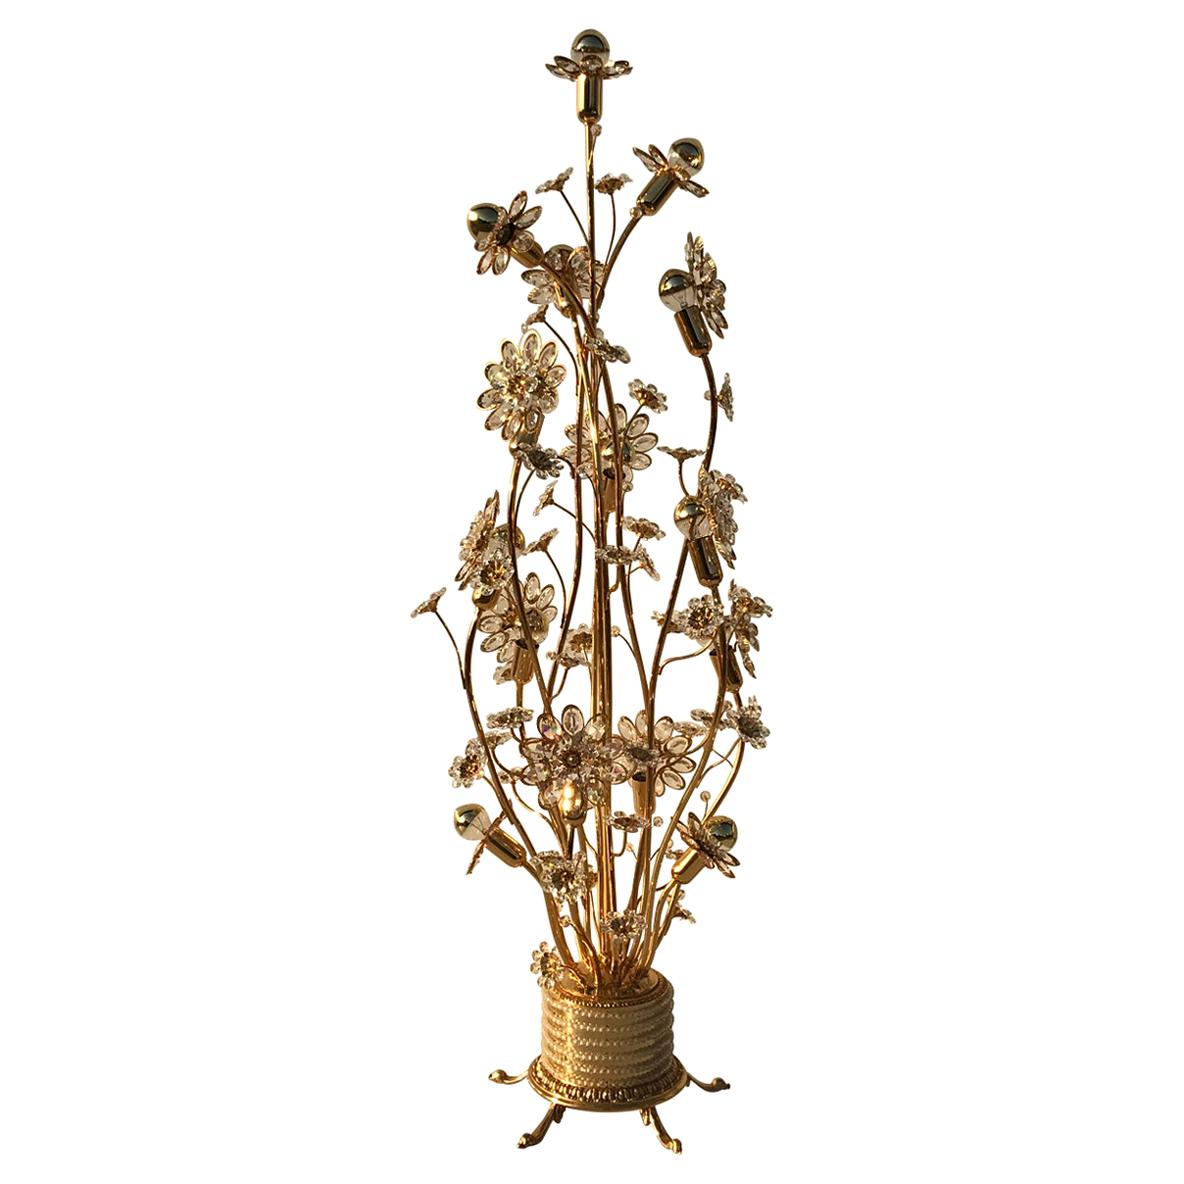 Illuminated Crystal Flower and Brass Floor Lamp by Palwa